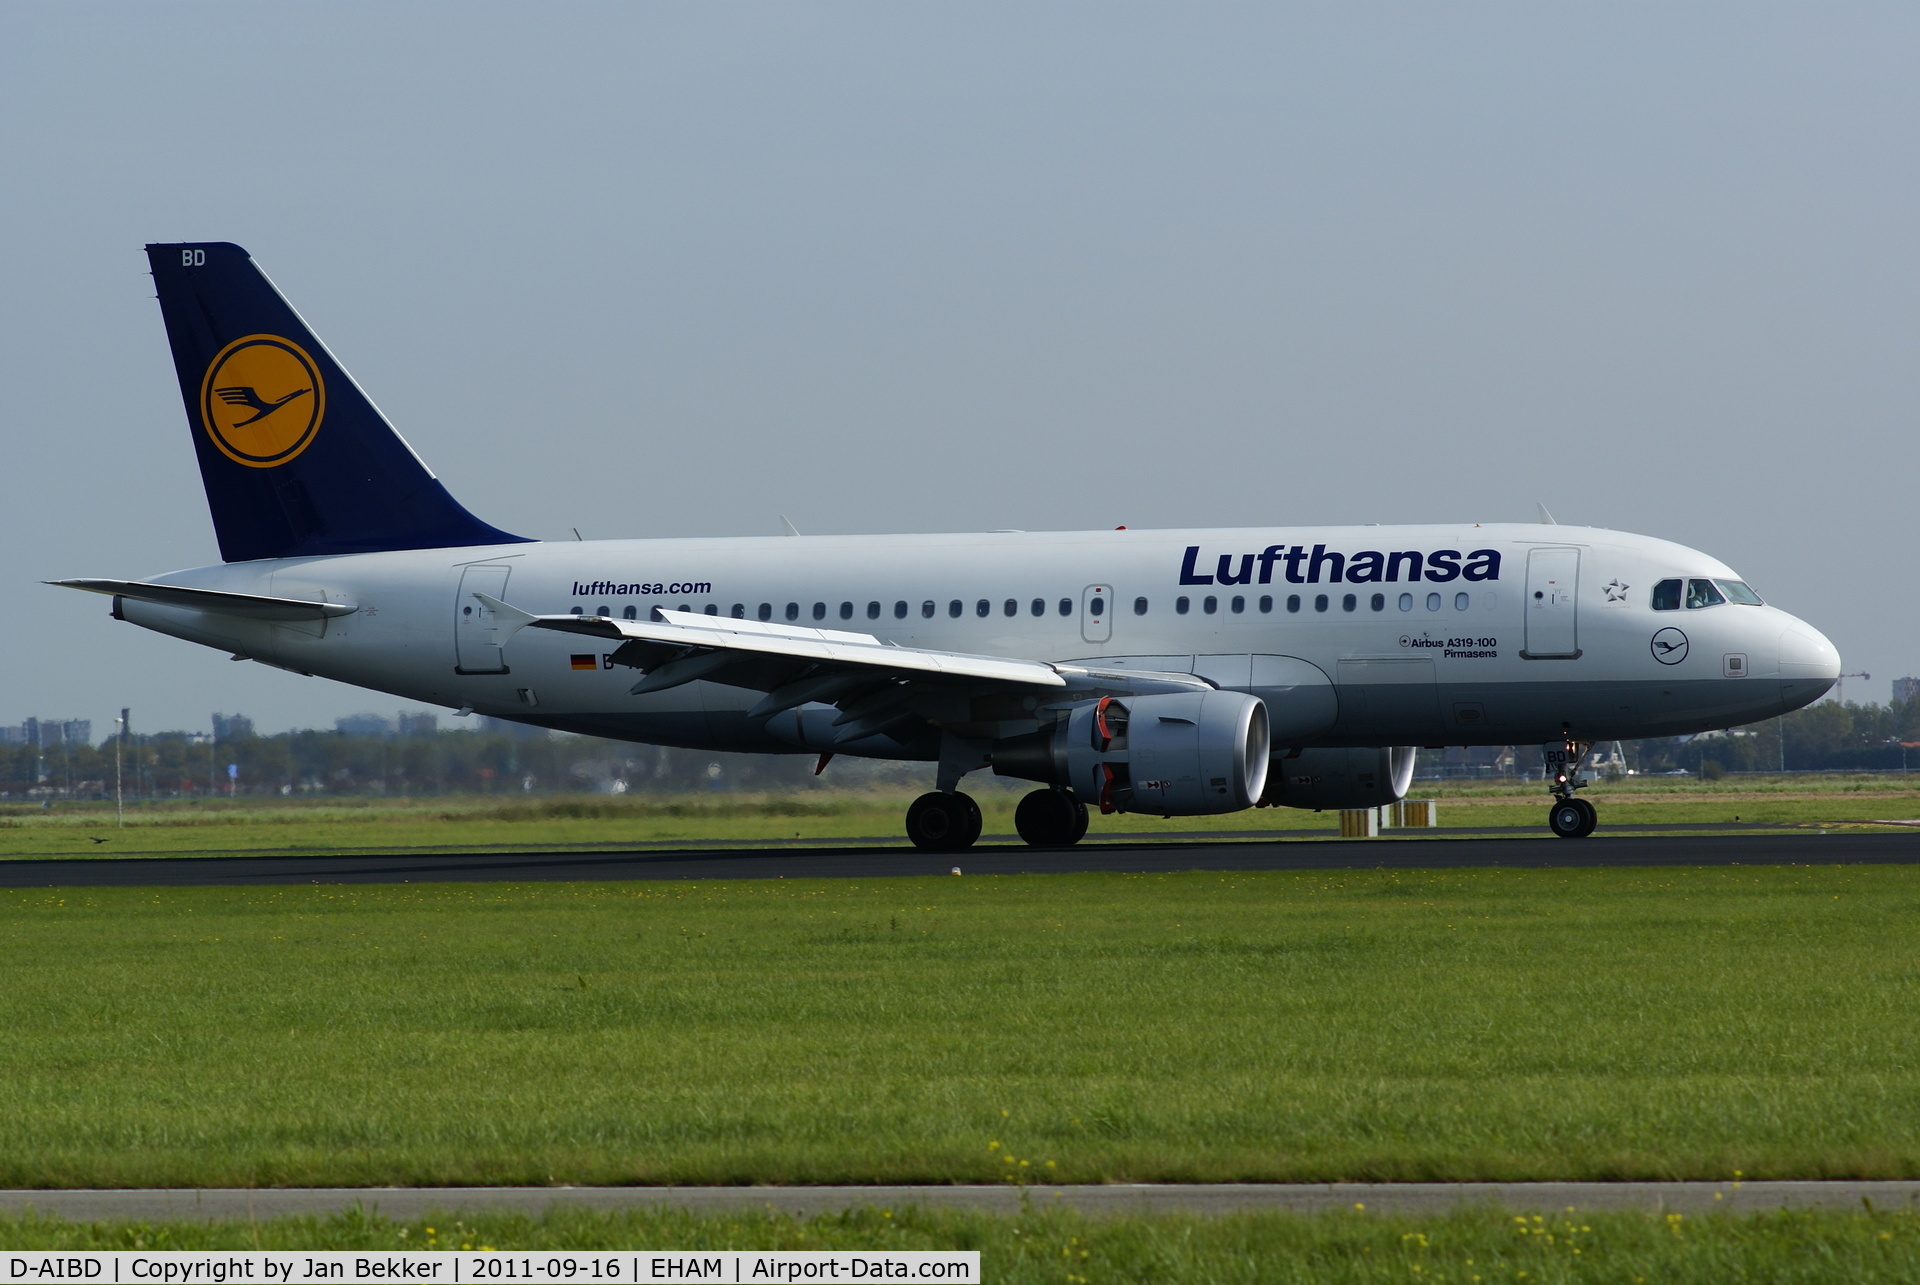 D-AIBD, 2010 Airbus A319-112 C/N 4455, just after landing on the Polderbaan at Schiphol